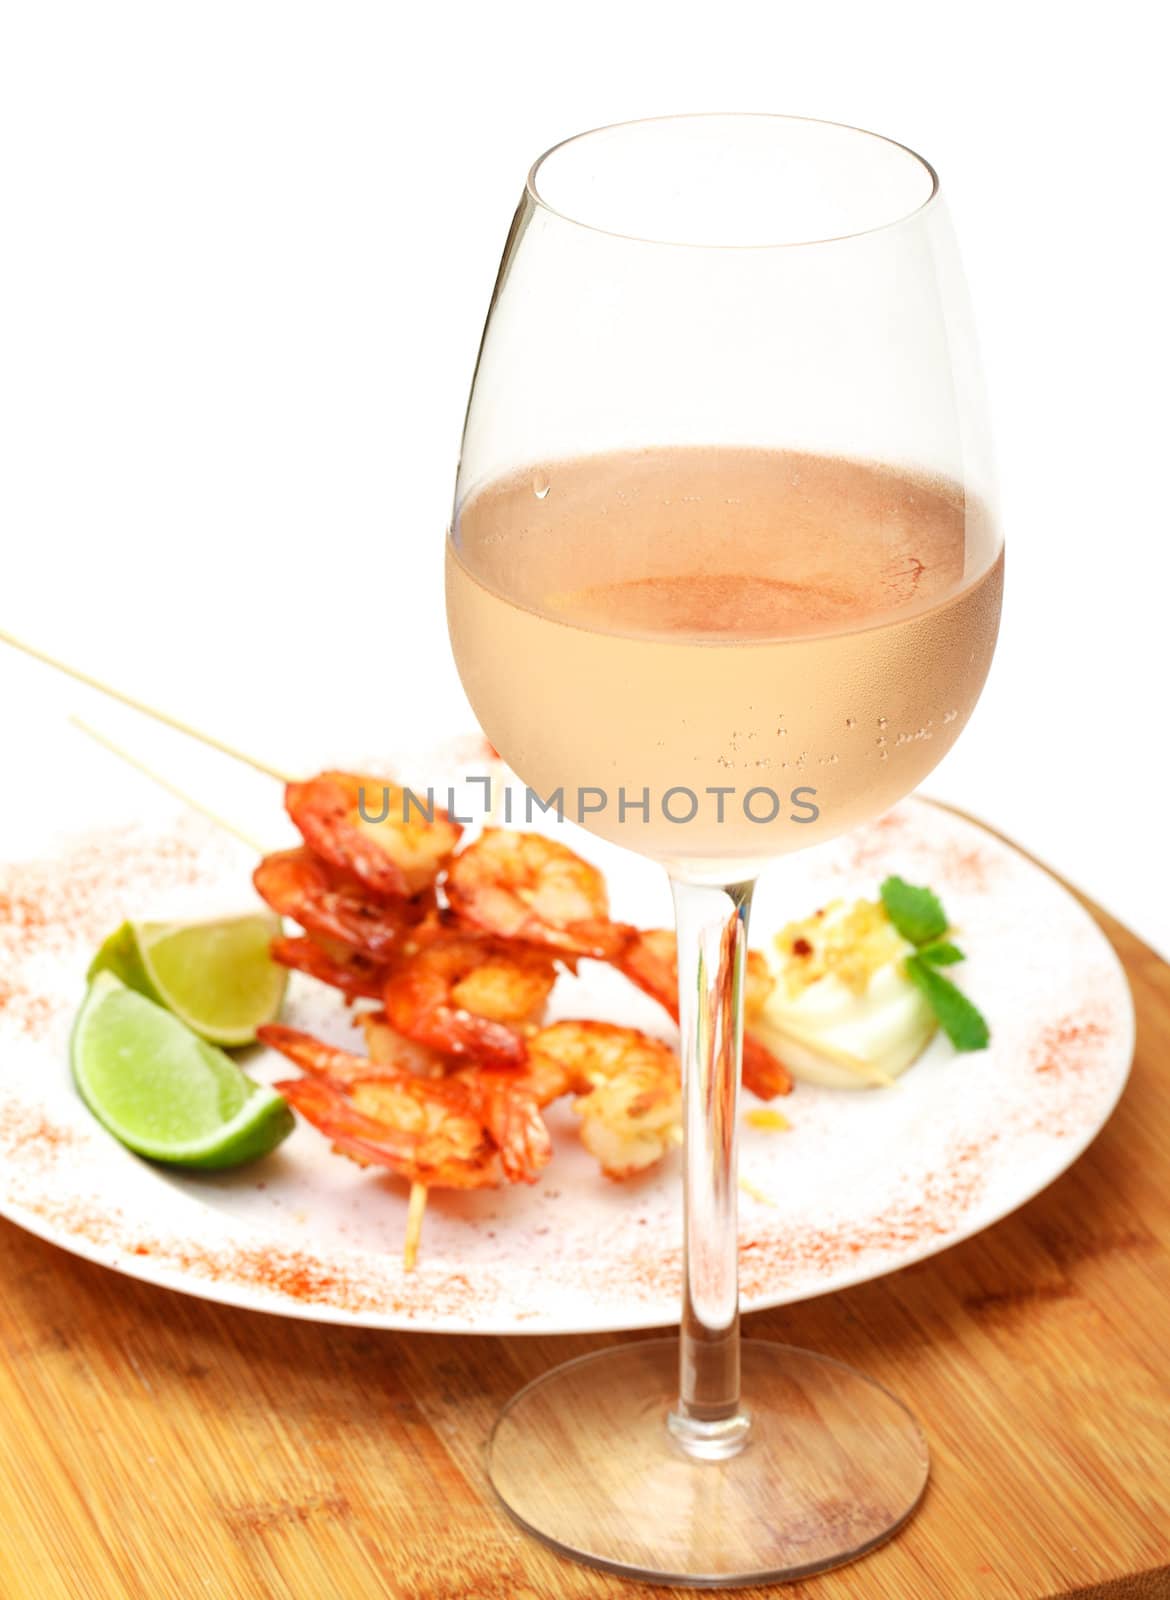 Fried King Prawns Served in Plate by Discovod